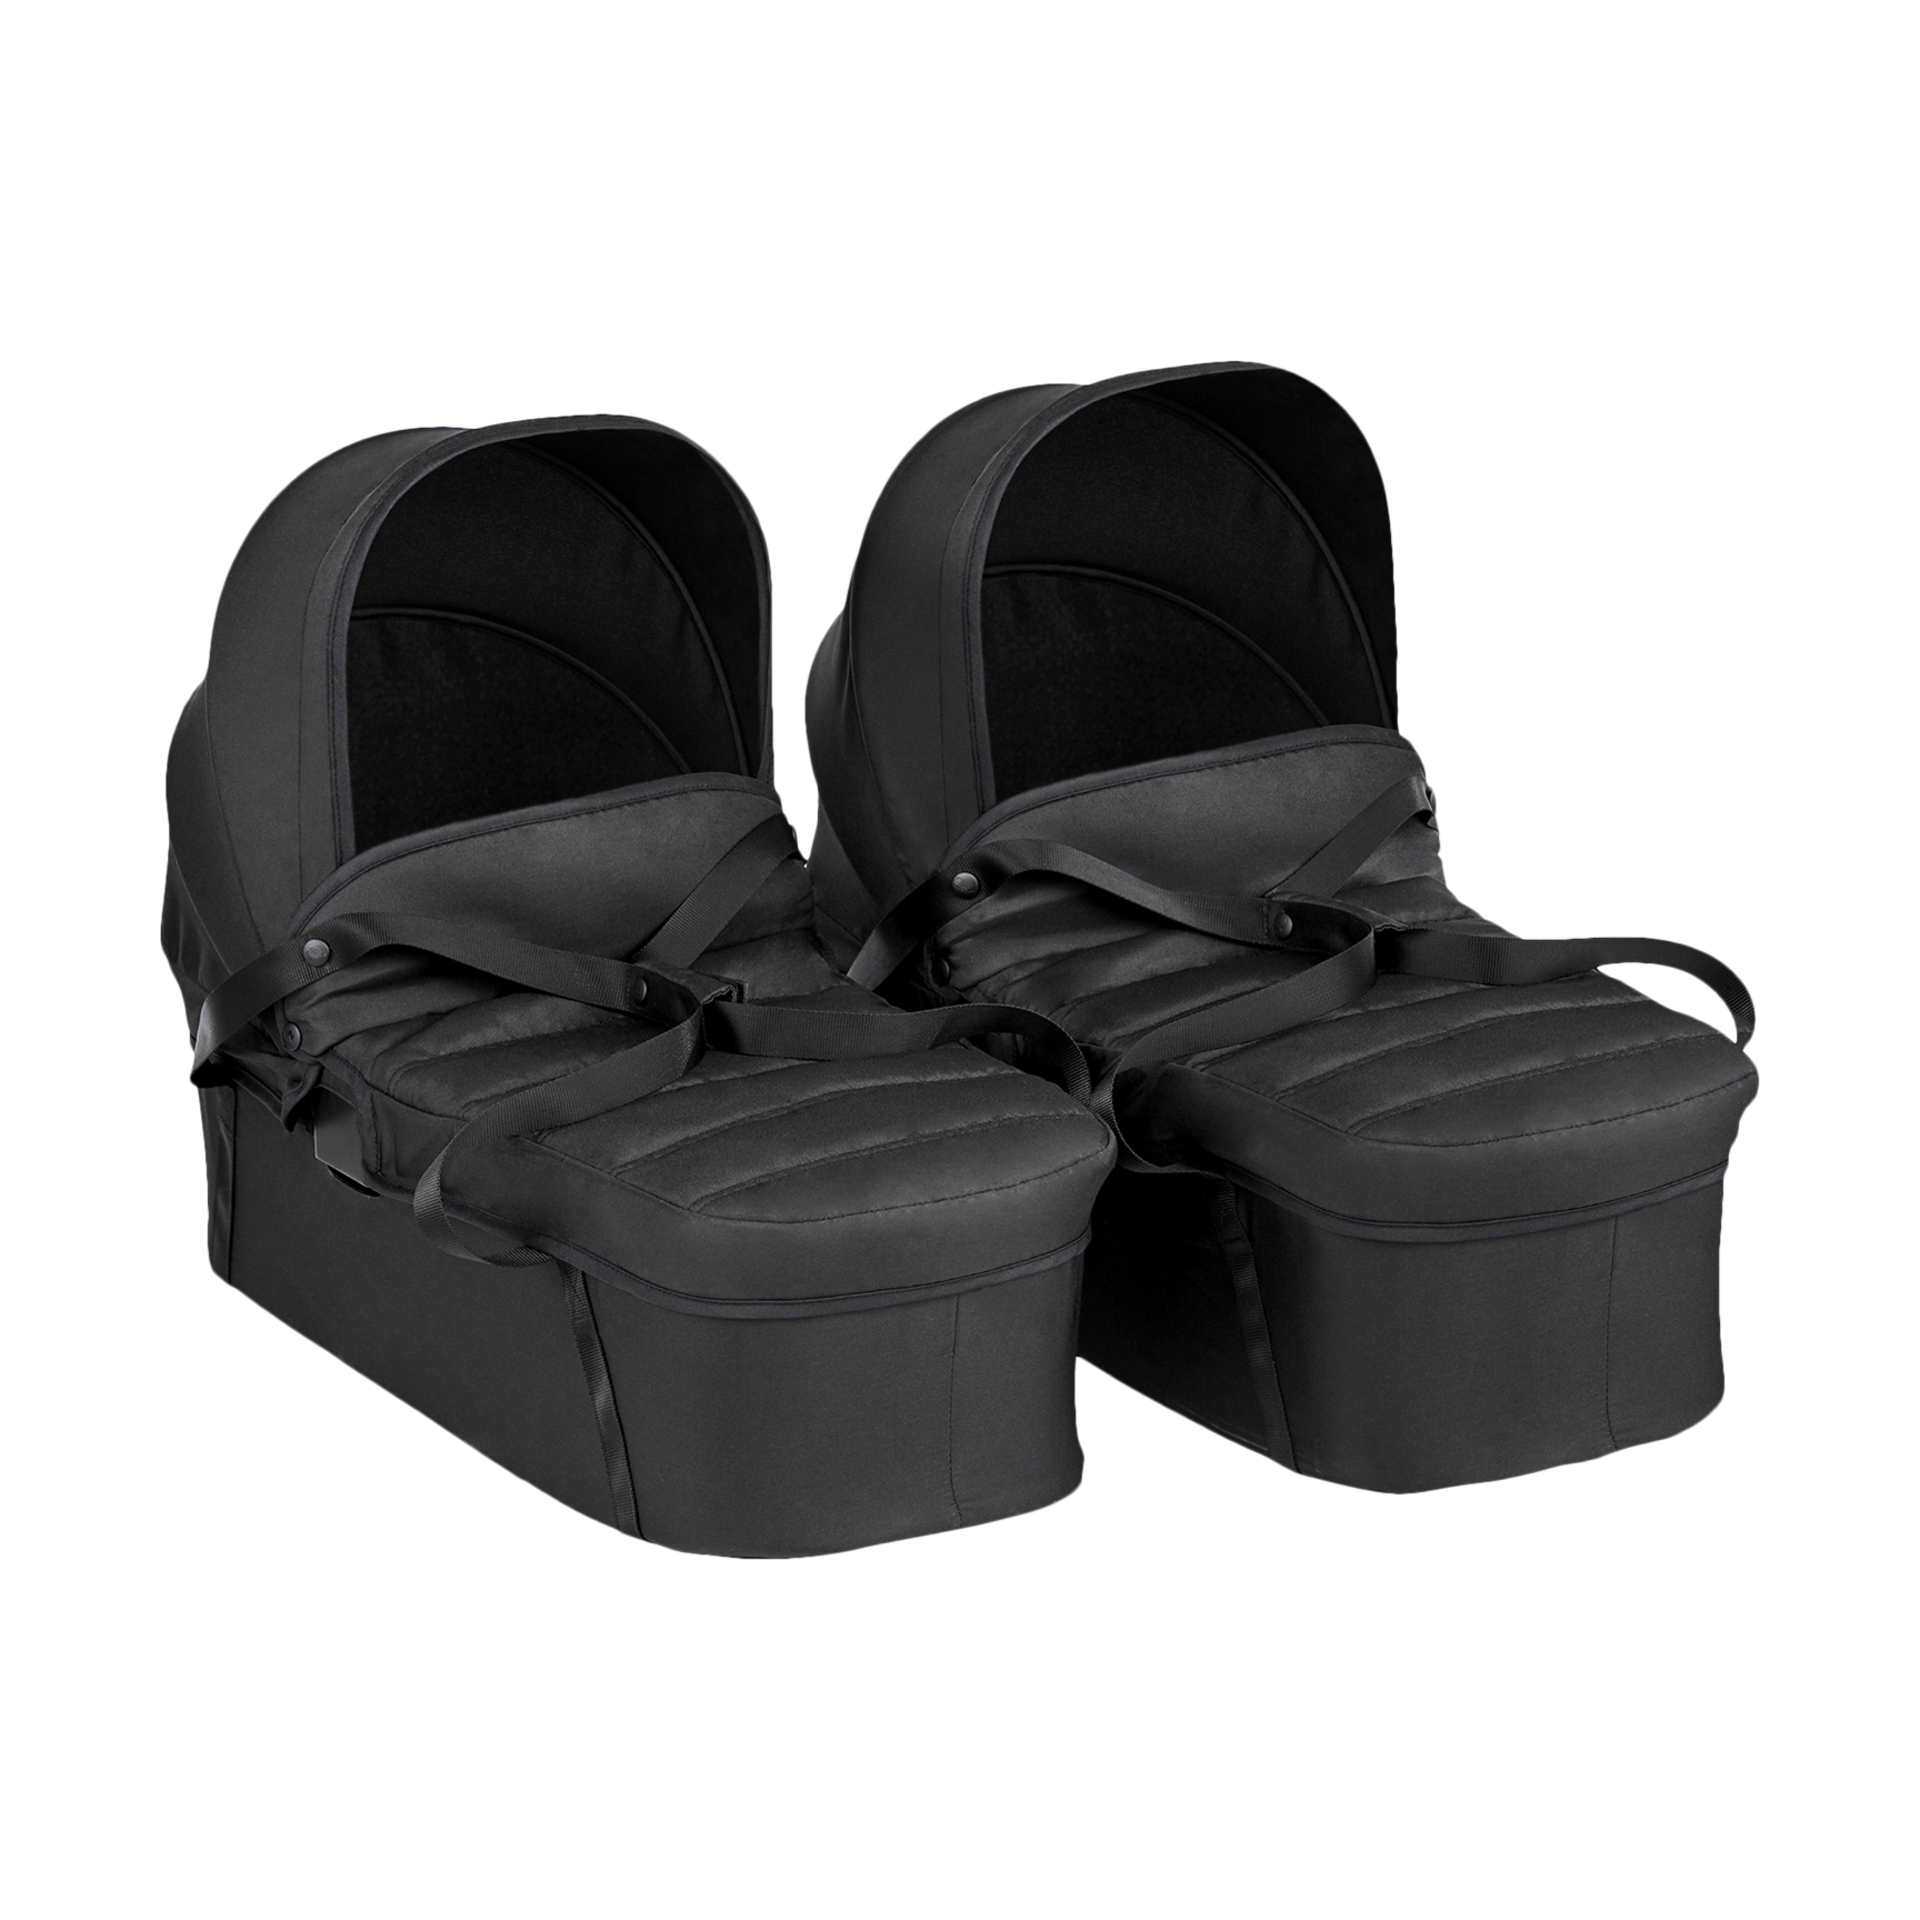 baby jogger compact carrycot adaptors double